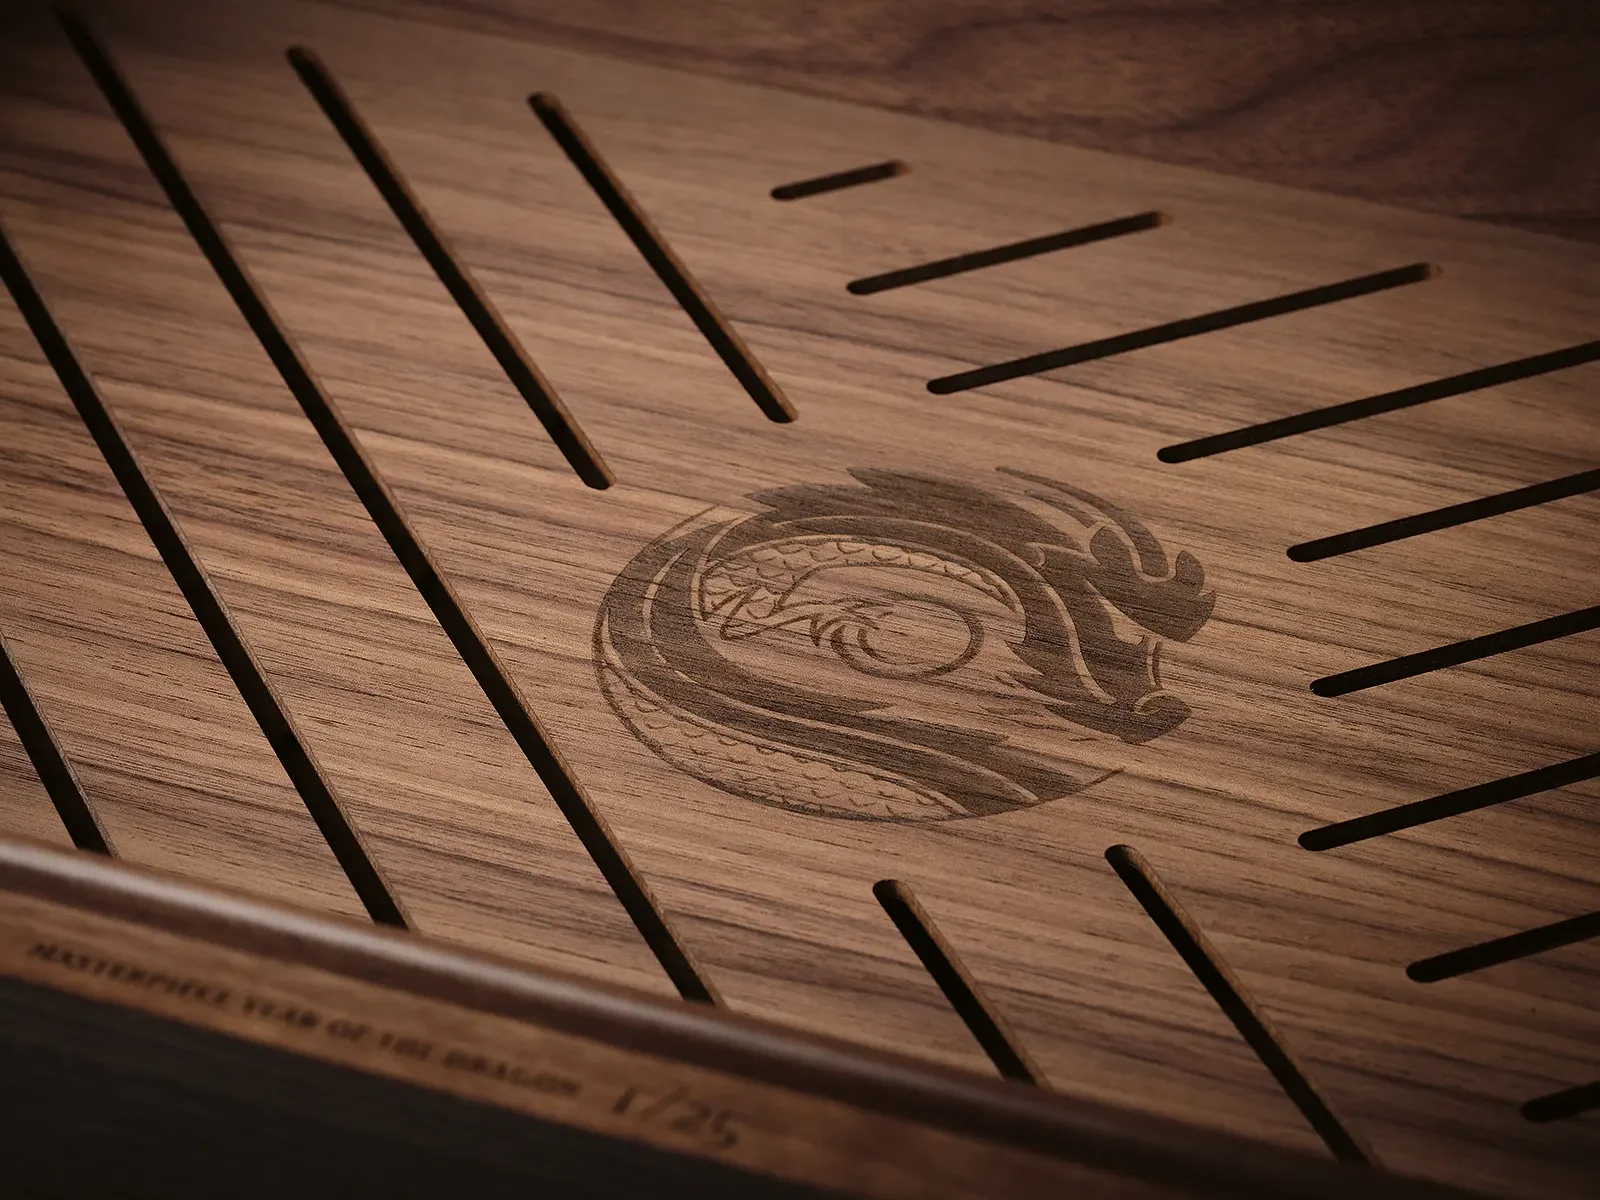 Logo of the dragon inside the box of the Davidoff Year of the Dragon Masterpiece Humidor.